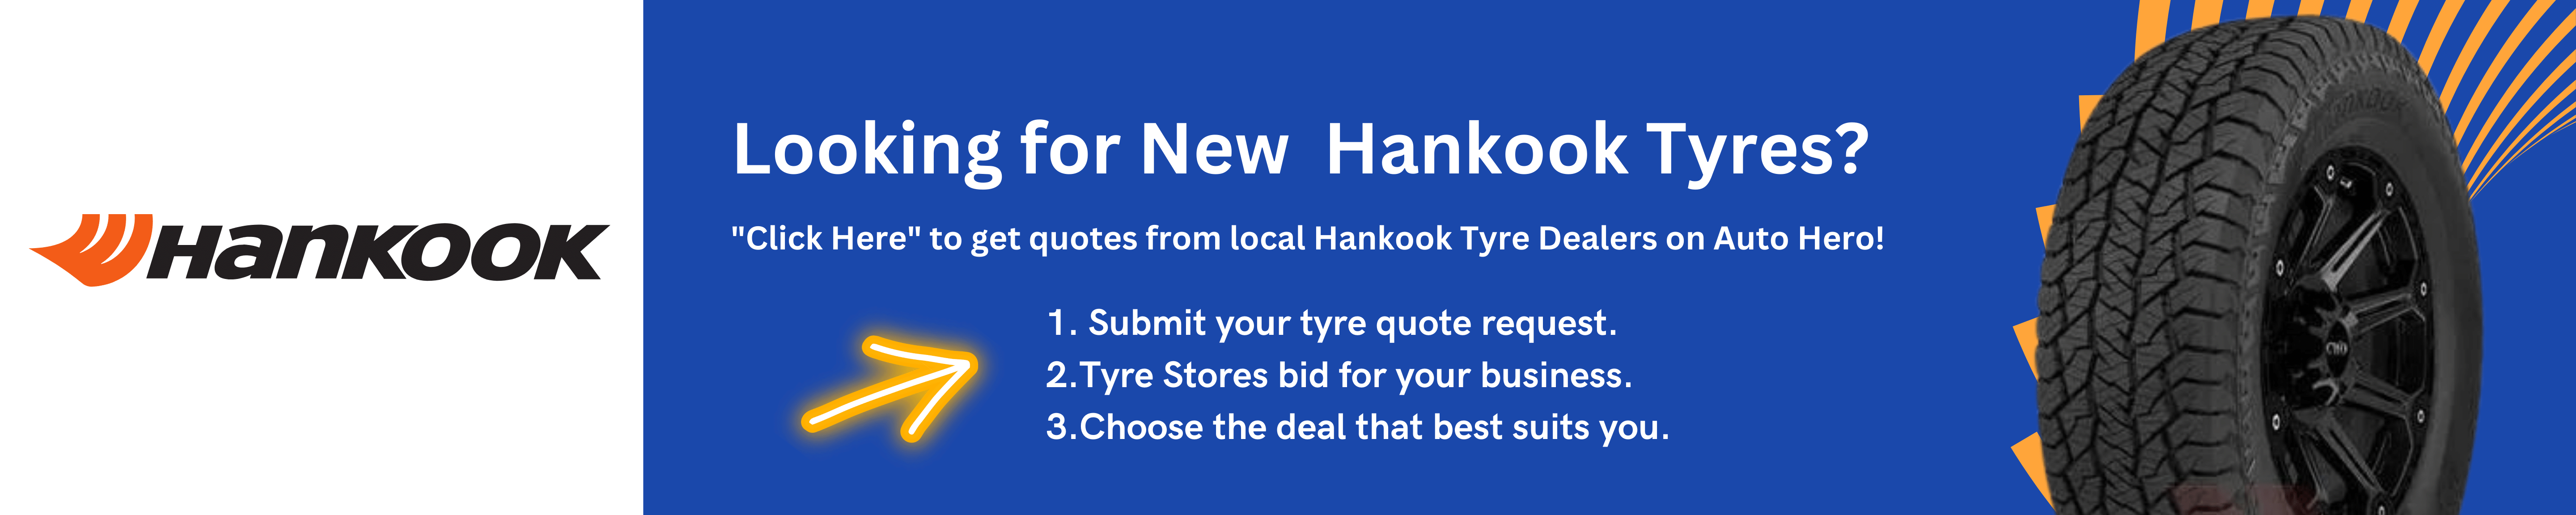 Where are Hankook tyres made?